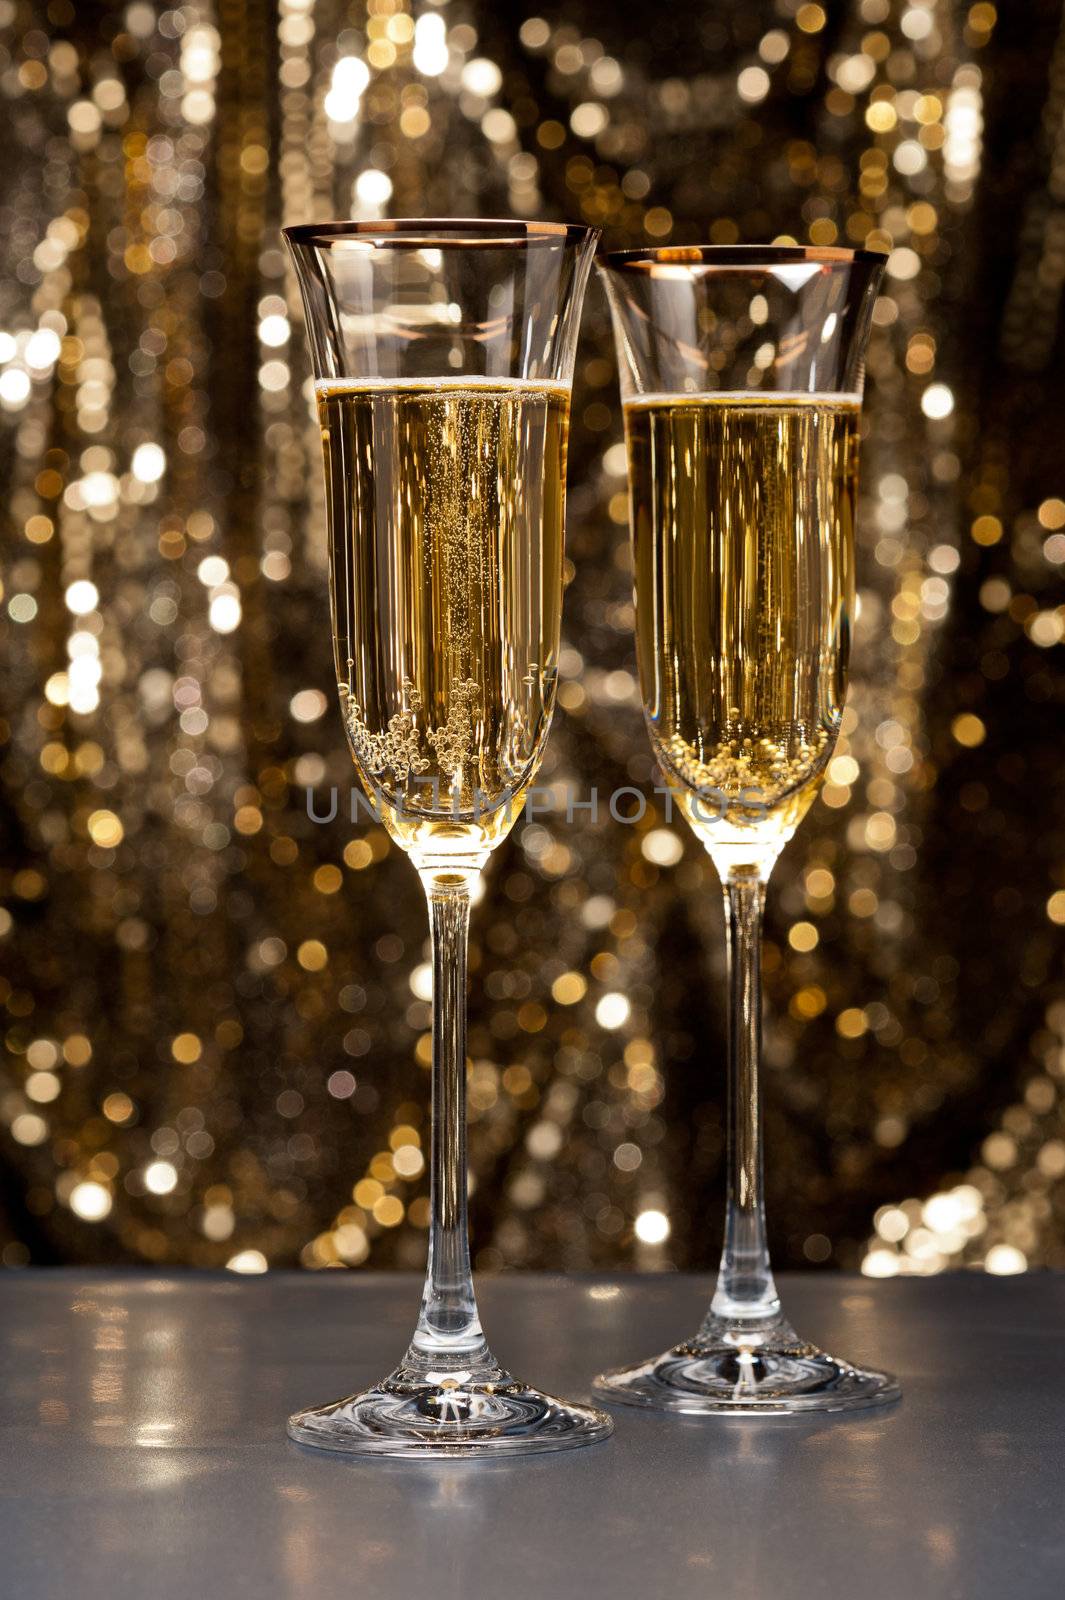 Champagne glasses in front of gold glitter background